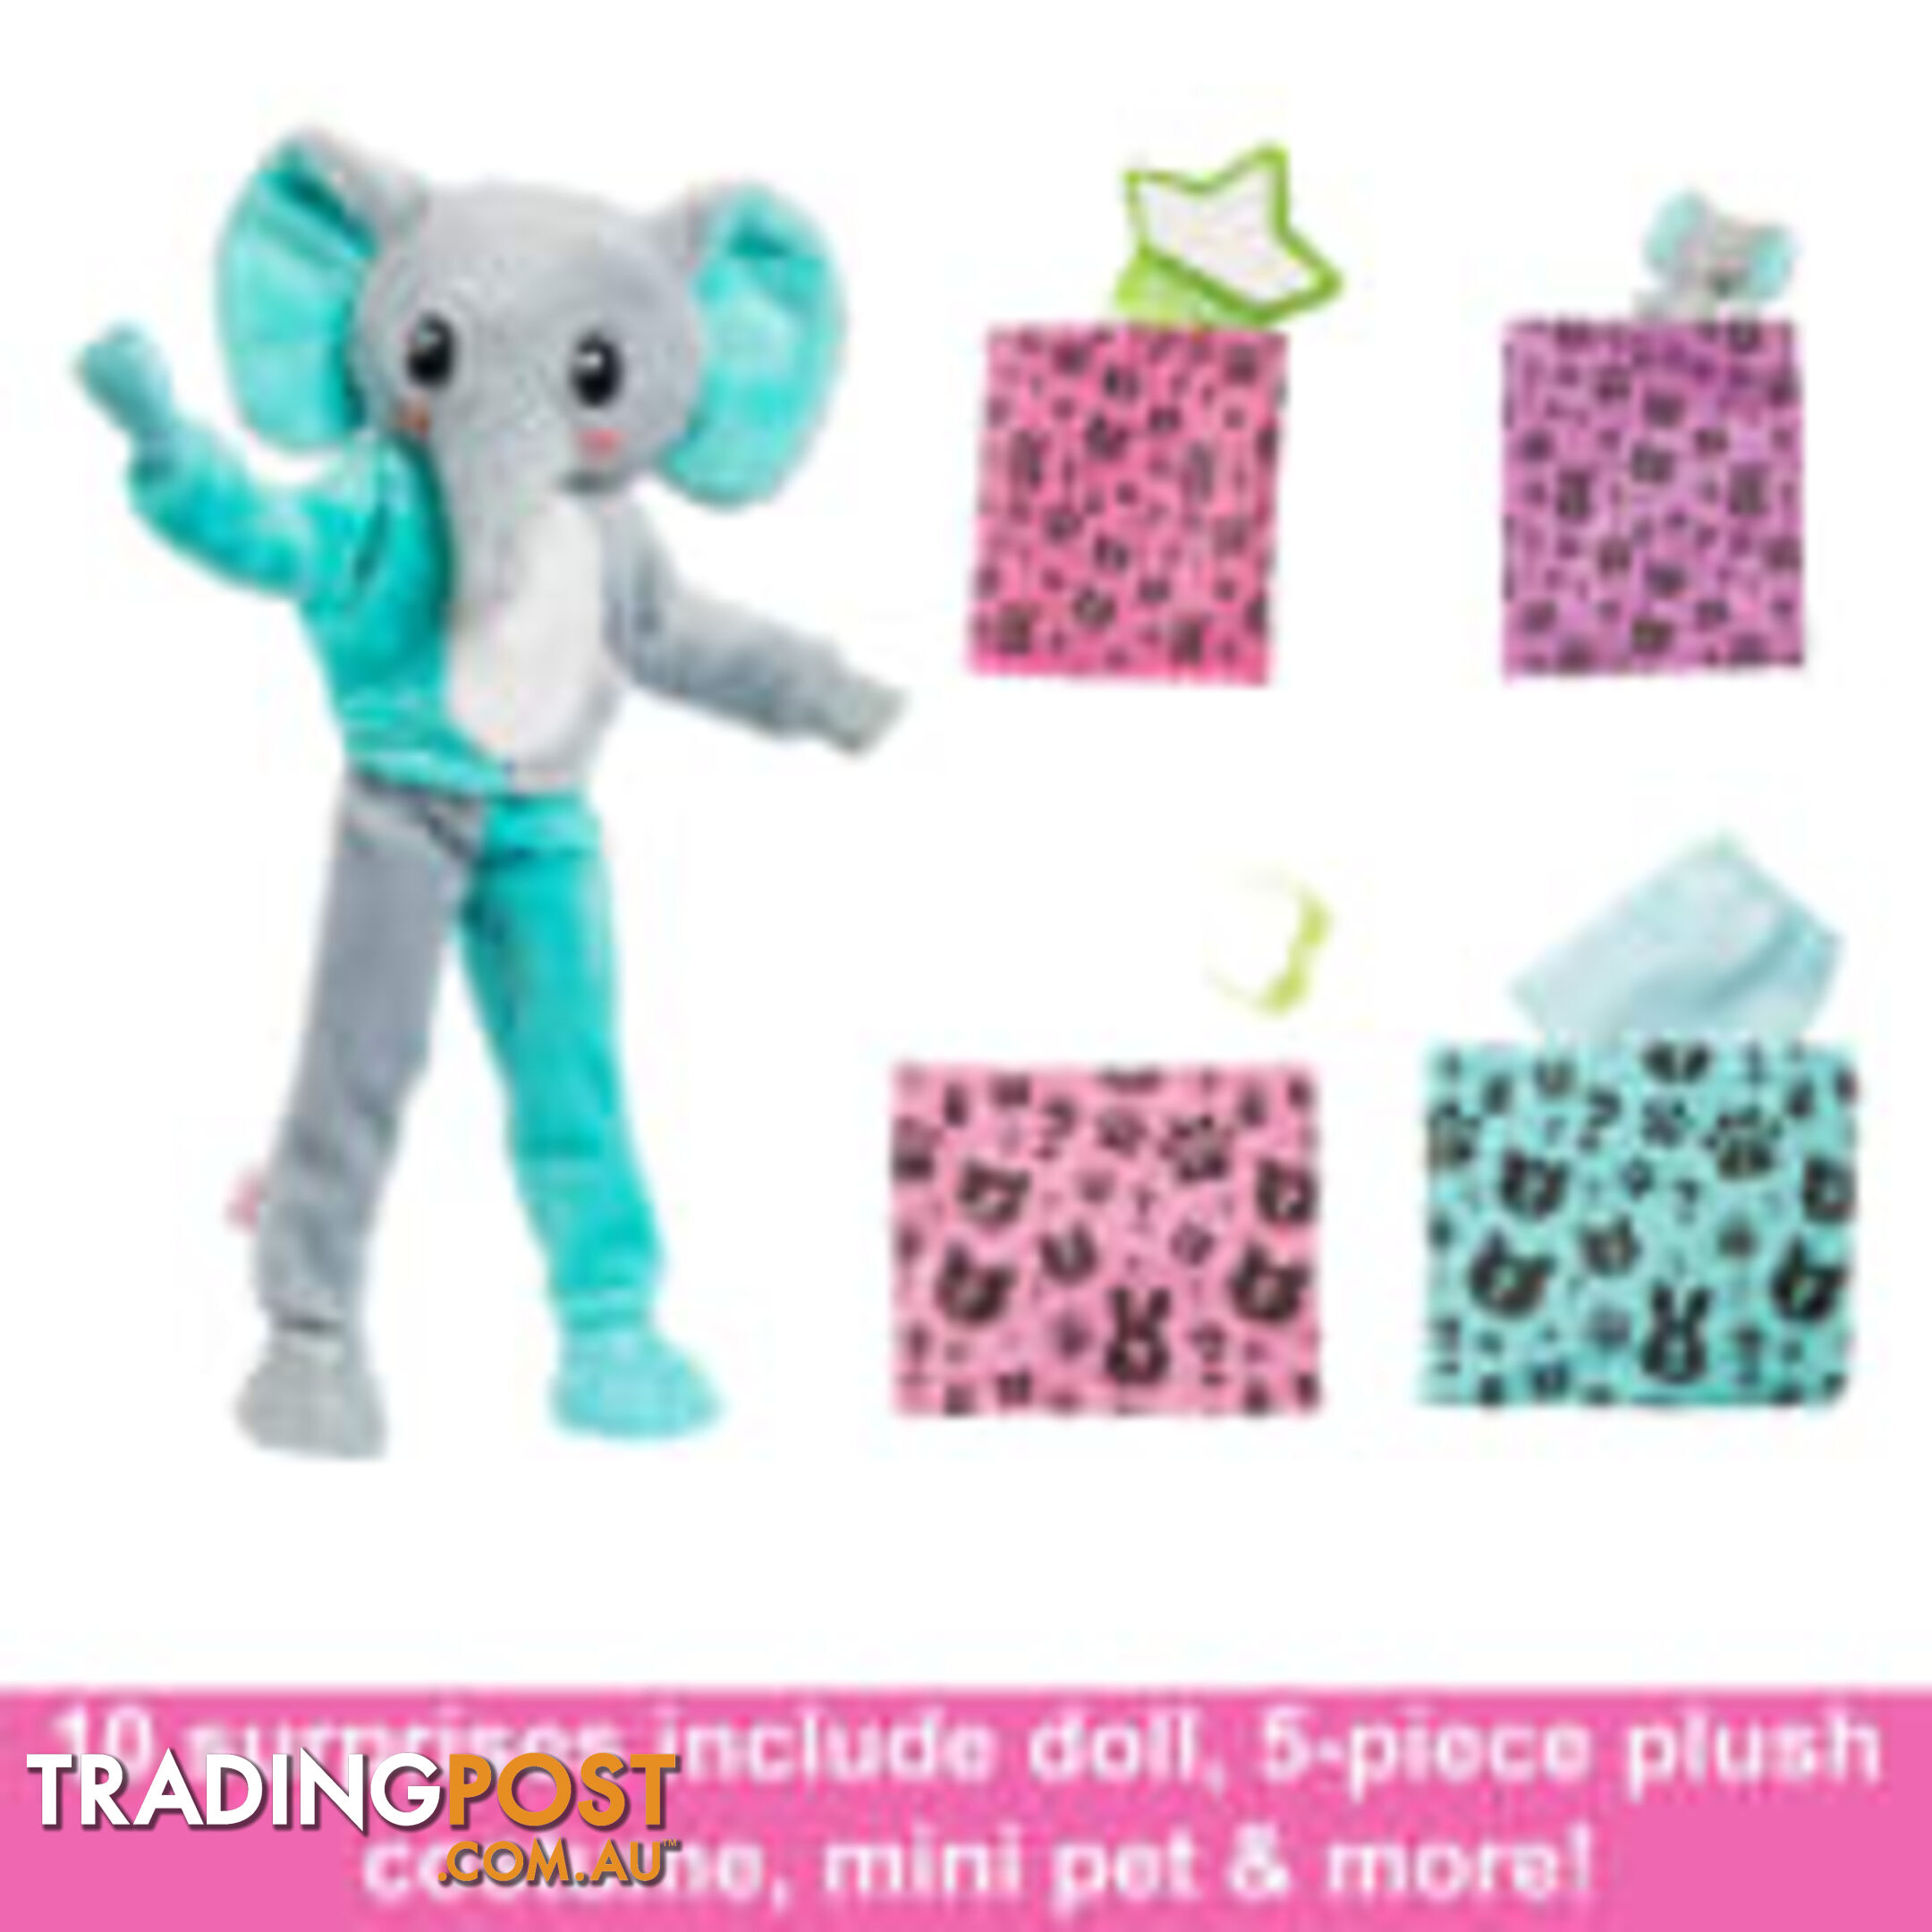 Barbie Cutie Reveal Doll And Accessories Jungle Series Elephant-themed Small Doll Set - Mahkp98 - 194735106615